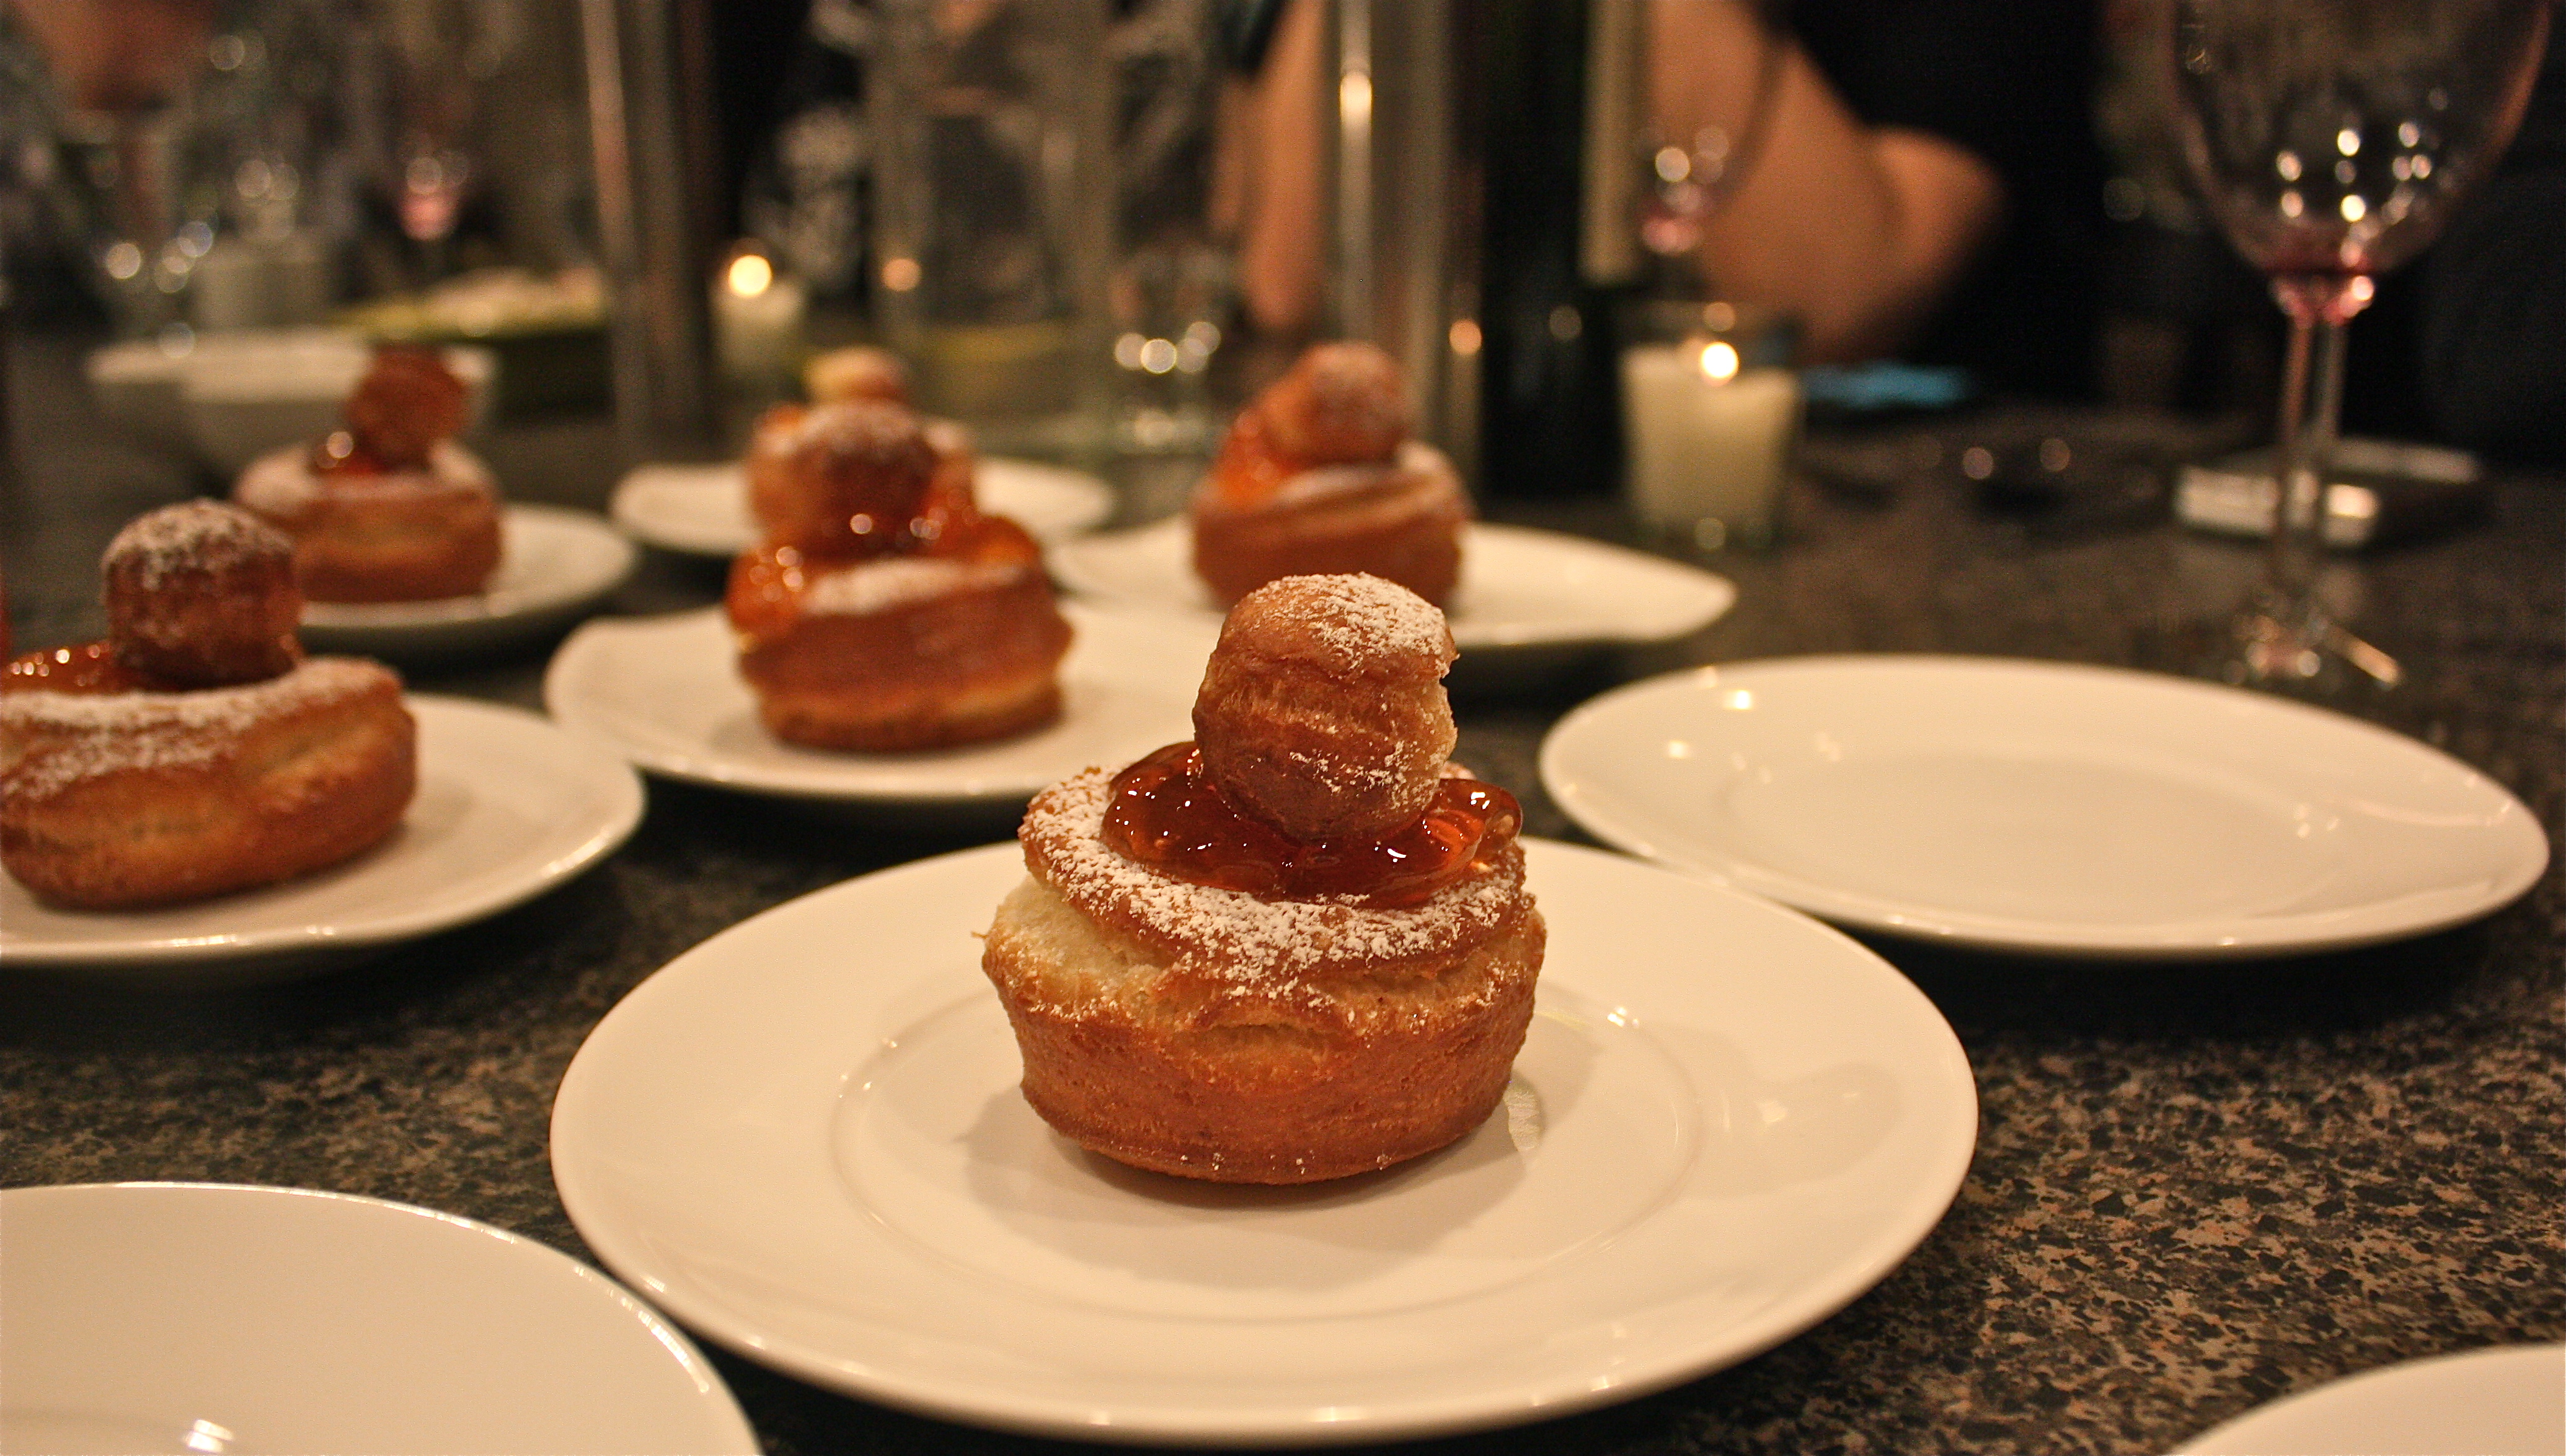 Raised doughnuts with rosehip jelly and powdered sugar